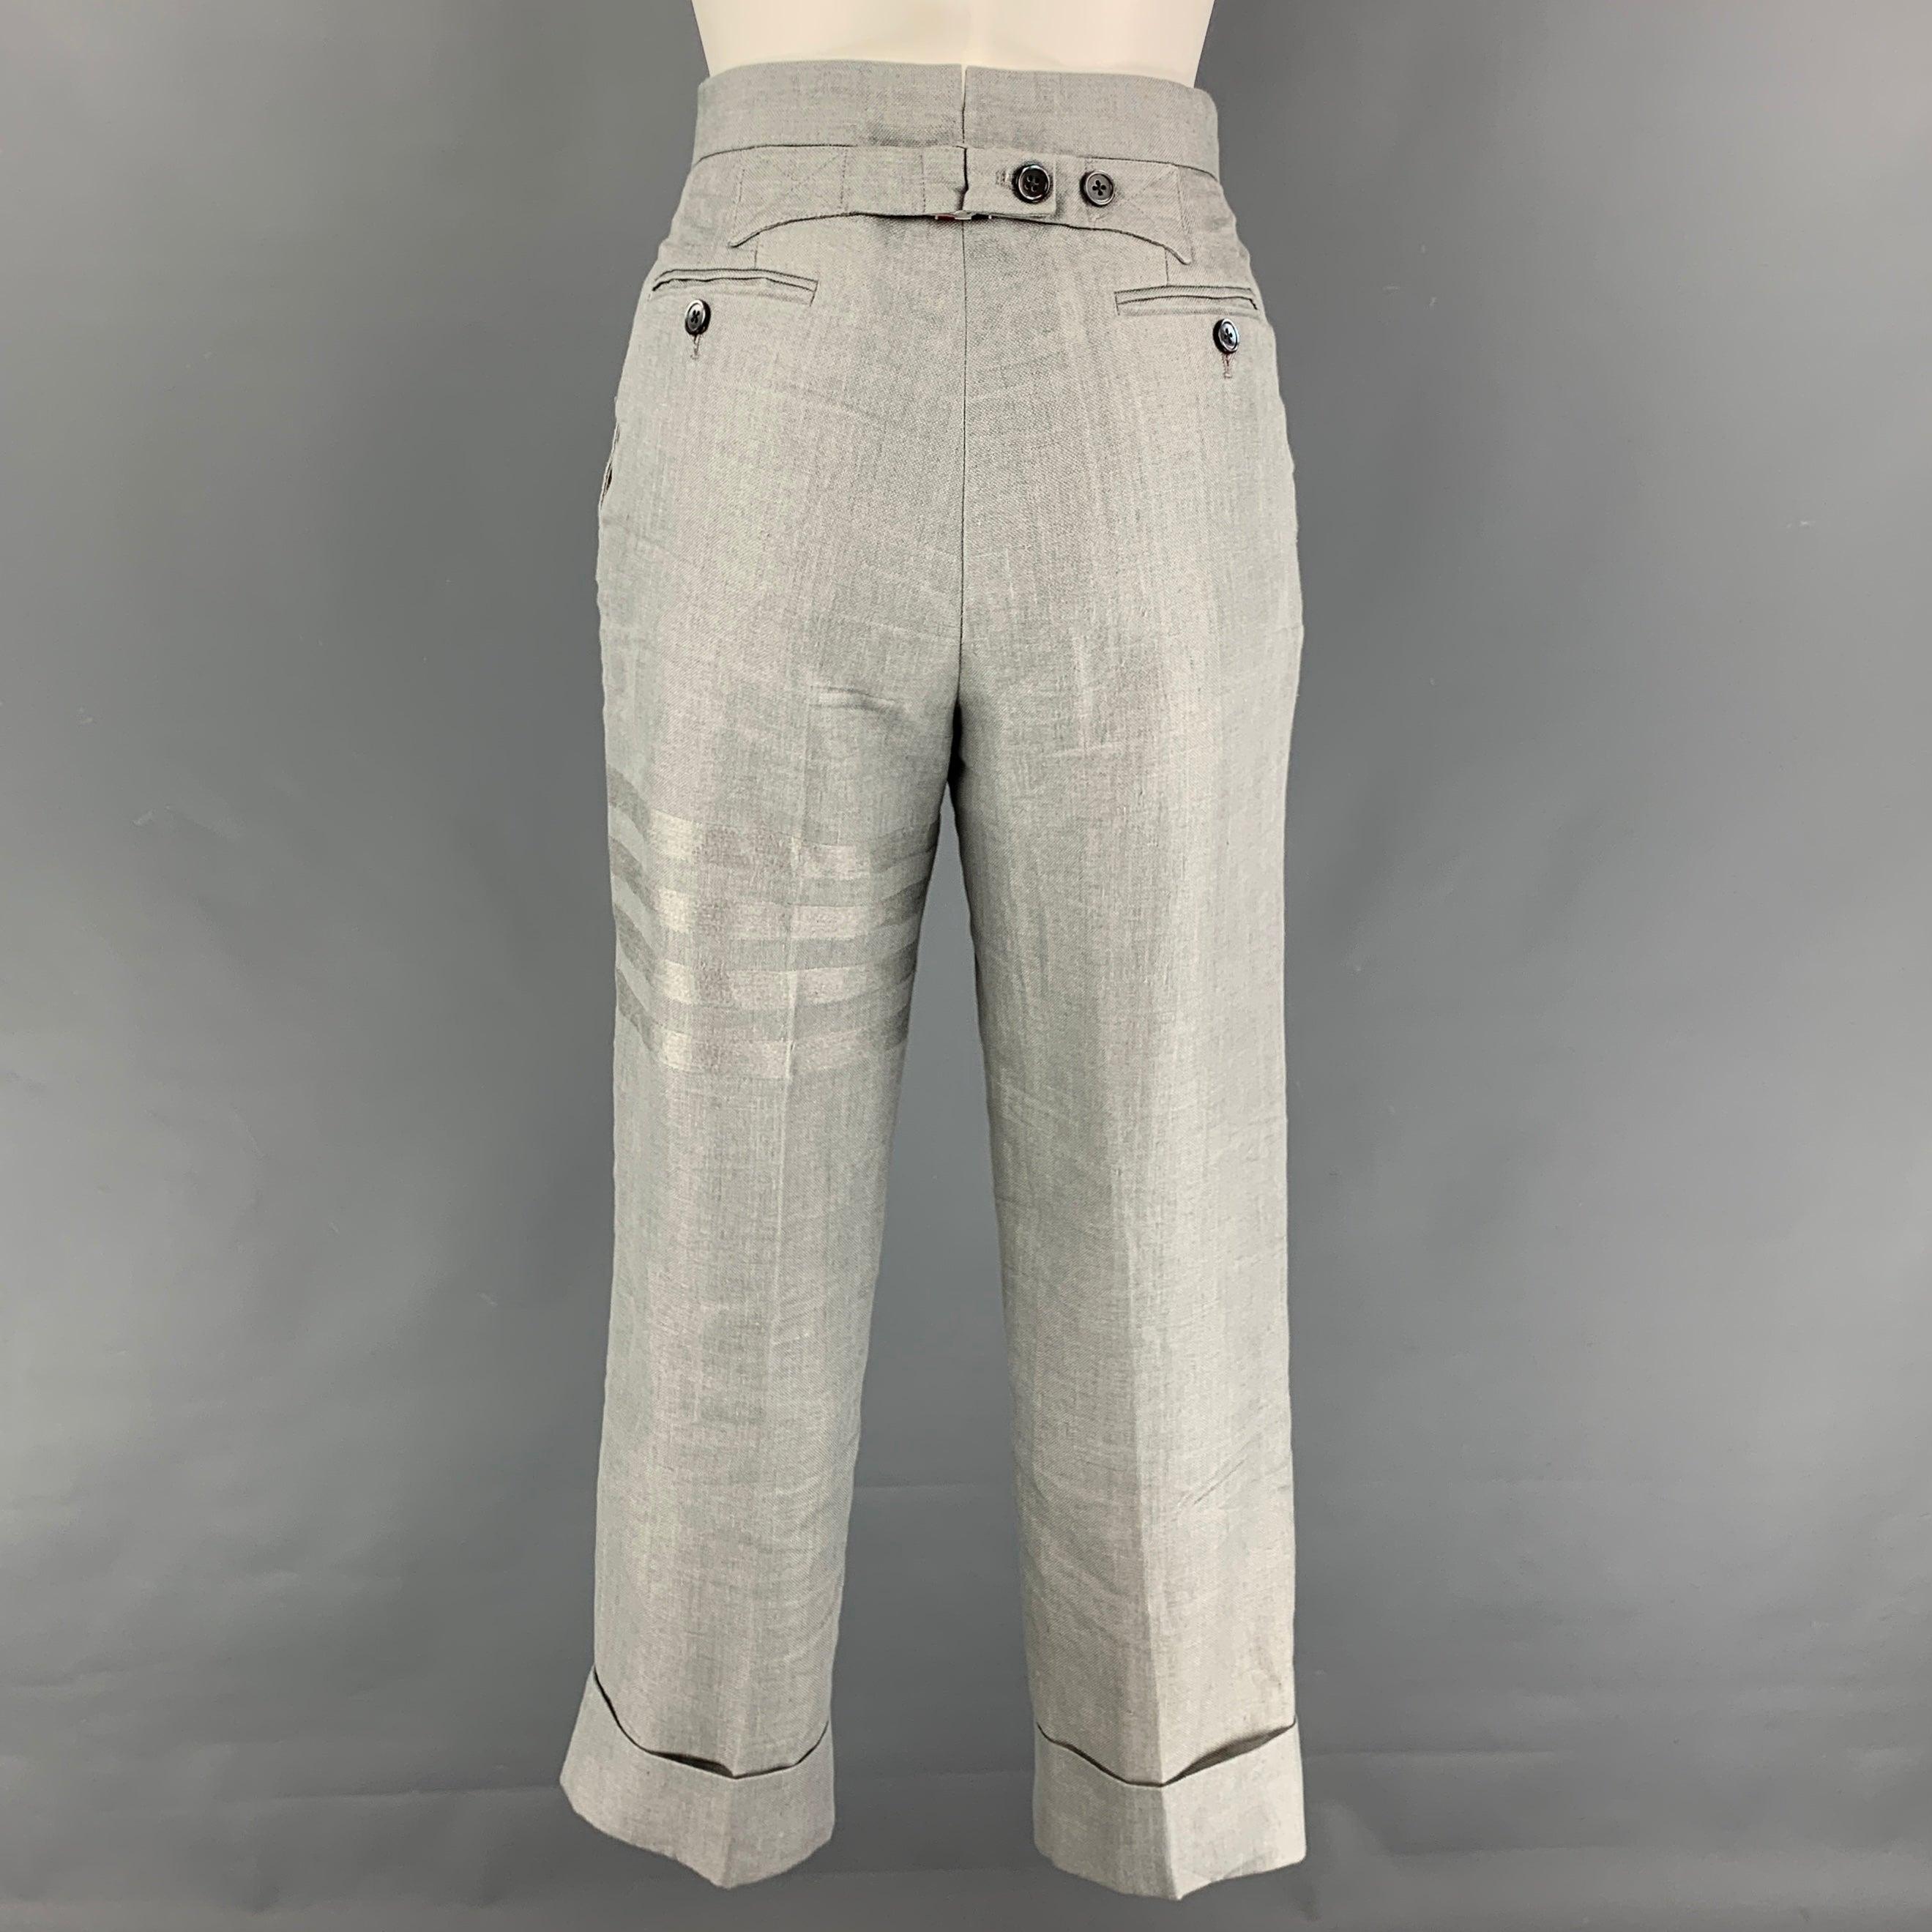 THOM BROWNE casual pants comes in a light gray linen featuring a high waist, cuffed leg, pleated, front tab, and a button fly closure. Made in Italy. Very Good
Pre-Owned Condition. 

Marked:   36 

Measurements: 
  Waist: 28 inches  Rise: 11 inches 